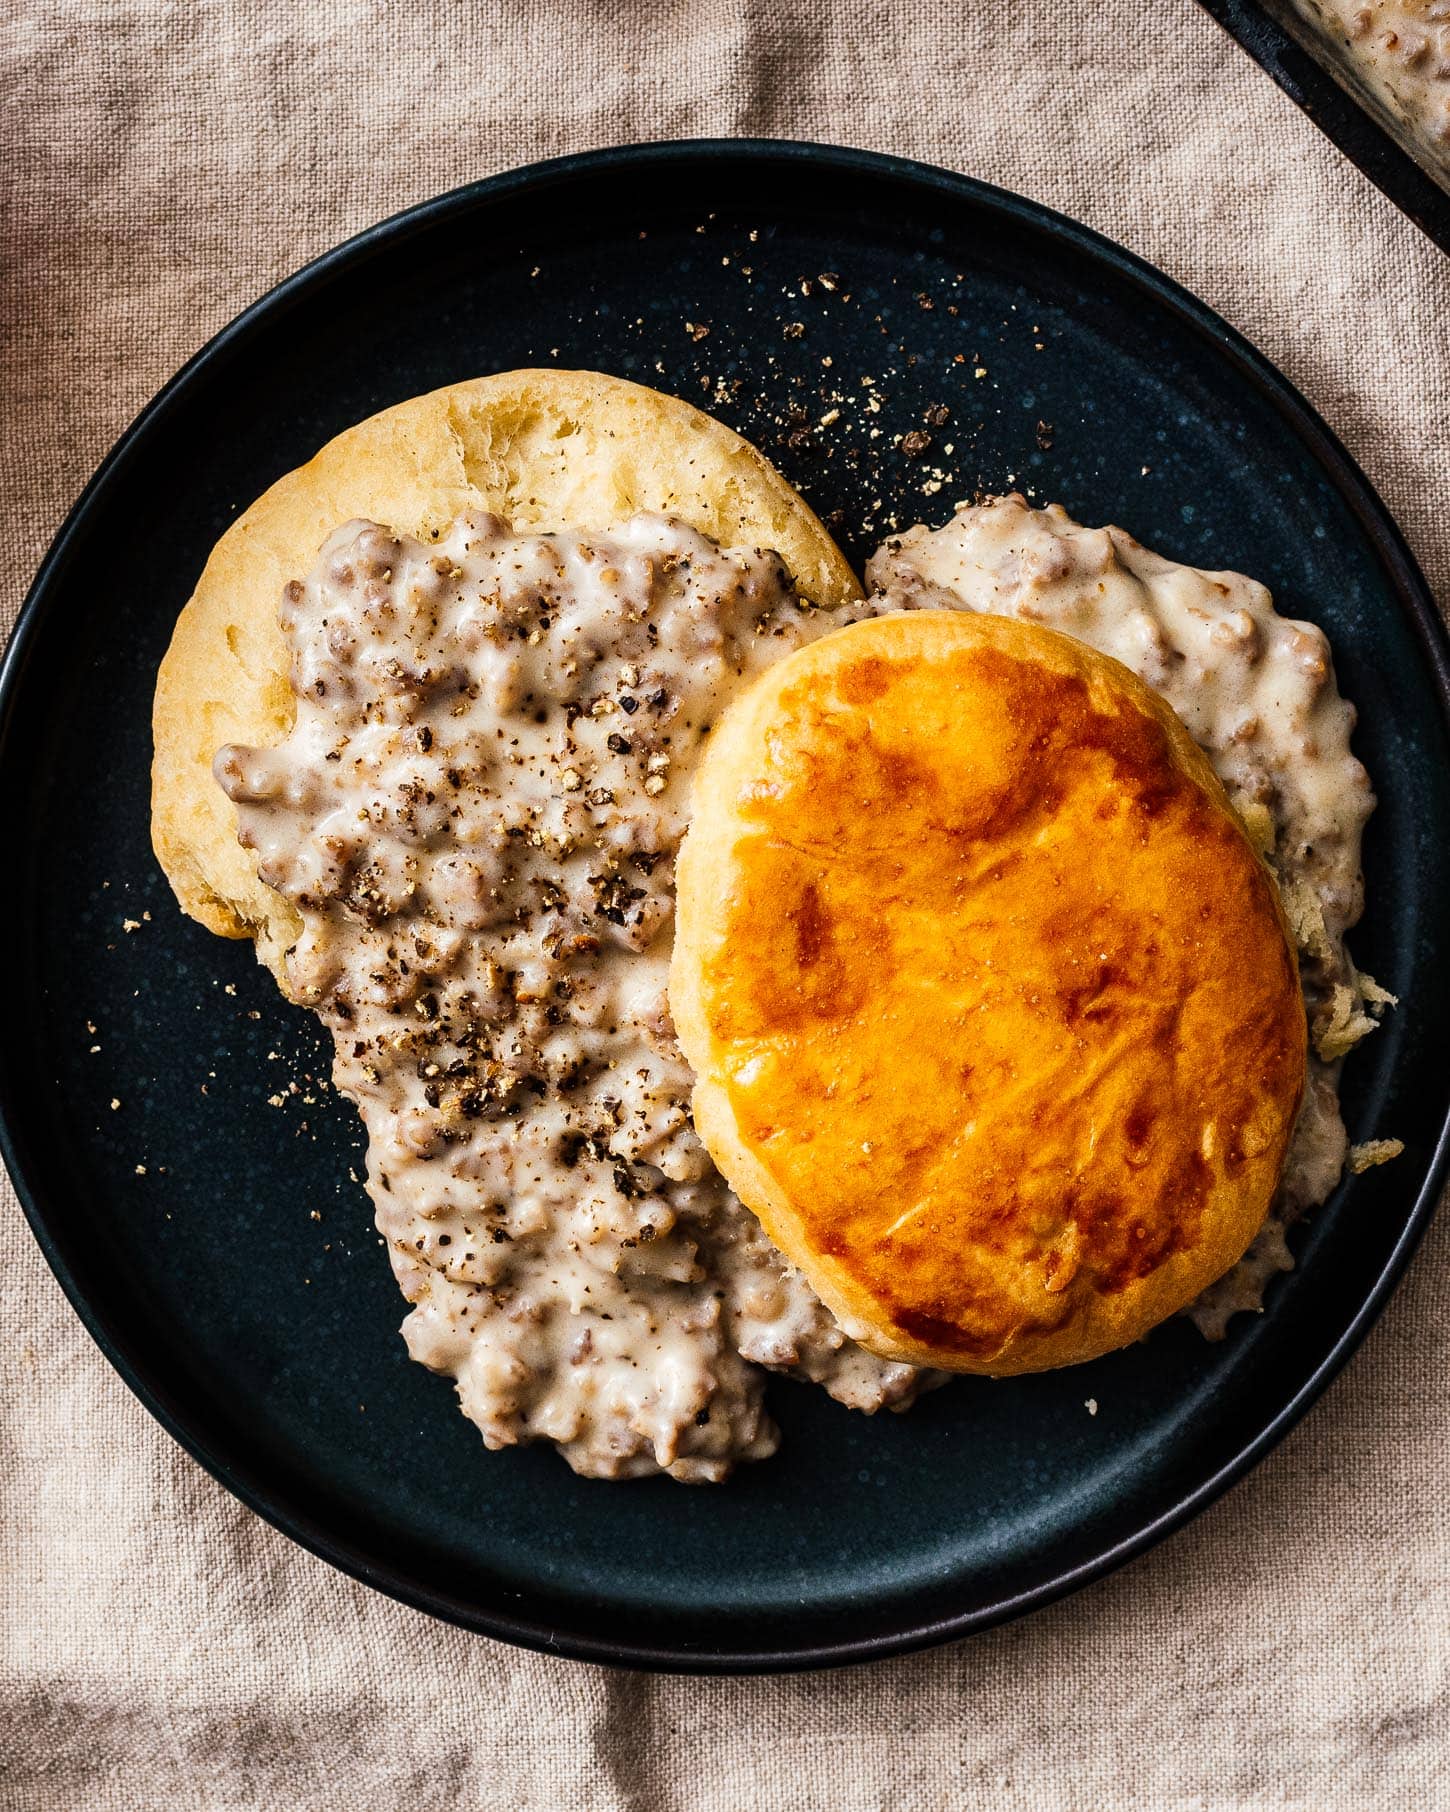 biscuits and sausage gravy | sharefavoritefood.com